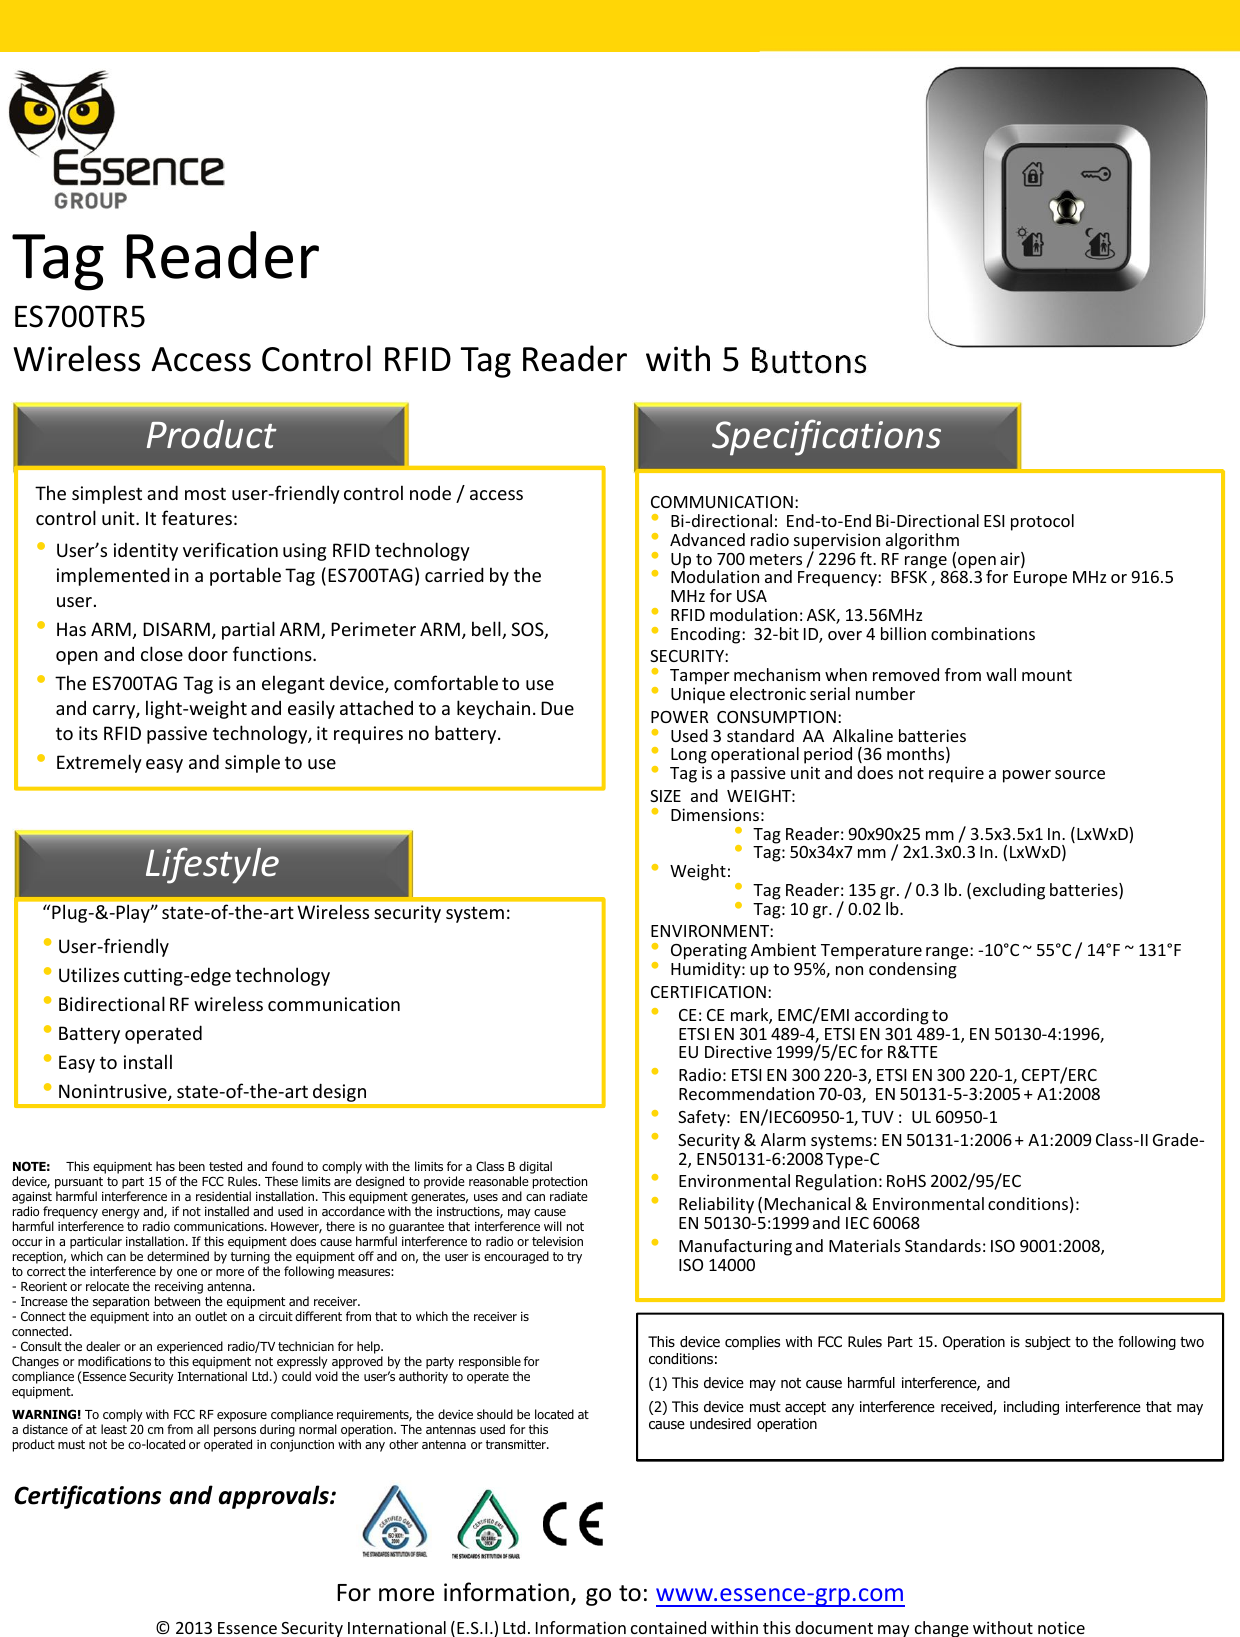 For more information, go to: www.essence-grp.com© 2013 Essence Security International (E.S.I.) Ltd. Information contained within this document may change without noticeTag ReaderES700TR5Wireless Access Control RFID Tag Reader  with 5 Buttons11LifestyleProduct SpecificationsThe simplest and most user-friendly control node / access control unit. It features:•User’s identity verification using RFID technology implemented in a portable Tag (ES700TAG) carried by the user.•Has ARM, DISARM, partial ARM, Perimeter ARM, bell, SOS, open and close door functions. •The ES700TAG Tag is an elegant device, comfortable to use and carry, light-weight and easily attached to a keychain. Due to its RFID passive technology, it requires no battery.•Extremely easy and simple to use“Plug-&amp;-Play” state-of-the-art Wireless security system:•User-friendly•Utilizes cutting-edge technology•Bidirectional RF wireless communication•Battery operated•Easy to install•Nonintrusive, state-of-the-art designCOMMUNICATION:•Bi-directional:  End-to-End Bi-Directional ESI protocol•Advanced radio supervision algorithm•Up to 700 meters / 2296 ft. RF range (open air)•Modulation and Frequency:  BFSK , 868.3 for Europe MHz or 916.5 MHz for USA•RFID modulation: ASK, 13.56MHz•Encoding:  32-bit ID, over 4 billion combinationsSECURITY:•Tamper mechanism when removed from wall mount•Unique electronic serial numberPOWER  CONSUMPTION:•Used 3 standard  AA  Alkaline batteries•Long operational period (36 months)•Tag is a passive unit and does not require a power sourceSIZE  and  WEIGHT: •Dimensions: •Tag Reader: 90x90x25 mm / 3.5x3.5x1 In. (LxWxD) •Tag: 50x34x7 mm / 2x1.3x0.3 In. (LxWxD) •Weight:  •Tag Reader: 135 gr. / 0.3 lb. (excluding batteries) •Tag: 10 gr. / 0.02 lb.ENVIRONMENT:•Operating Ambient Temperature range: -10°C ~ 55°C / 14°F ~ 131°F •Humidity: up to 95%, non condensing CERTIFICATION:•CE: CE mark, EMC/EMI according to ETSI EN 301 489-4, ETSI EN 301 489-1, EN 50130-4:1996,EU Directive 1999/5/EC for R&amp;TTE •Radio: ETSI EN 300 220-3, ETSI EN 300 220-1, CEPT/ERC Recommendation 70-03,  EN 50131-5-3:2005 + A1:2008 •Safety:  EN/IEC60950-1, TUV :  UL 60950-1•Security &amp; Alarm systems: EN 50131-1:2006 + A1:2009 Class-II Grade-2, EN50131-6:2008 Type-C•Environmental Regulation: RoHS 2002/95/EC•Reliability (Mechanical &amp; Environmental conditions):  EN 50130-5:1999 and IEC 60068•Manufacturing and Materials Standards: ISO 9001:2008, ISO 14000Certifications and approvals:NOTE: This equipment has been tested and found to comply with the limits for a Class B digital device, pursuant to part 15 of the FCC Rules. These limits are designed to provide reasonable protection against harmful interference in a residential installation. This equipment generates, uses and can radiate radio frequency energy and, if not installed and used in accordance with the instructions, may cause harmful interference to radio communications. However, there is no guarantee that interference will not occur in a particular installation. If this equipment does cause harmful interference to radio or television reception, which can be determined by turning the equipment off and on, the user is encouraged to try to correct the interference by one or more of the following measures: - Reorient or relocate the receiving antenna.- Increase the separation between the equipment and receiver.- Connect the equipment into an outlet on a circuit different from that to which the receiver is connected.- Consult the dealer or an experienced radio/TV technician for help.Changes or modifications to this equipment not expressly approved by the party responsible for compliance (Essence Security International Ltd.) could void the user’s authority to operate the equipment.WARNING! To comply with FCC RF exposure compliance requirements, the device should be located at a distance of at least 20 cm from all persons during normal operation. The antennas used for this product must not be co-located or operated in conjunction with any other antenna or transmitter.This device complies with FCC Rules Part 15. Operation is subject to the following twoconditions:(1) This device may not cause harmful interference, and(2) This device must accept any interference received, including interference that maycause undesired operation